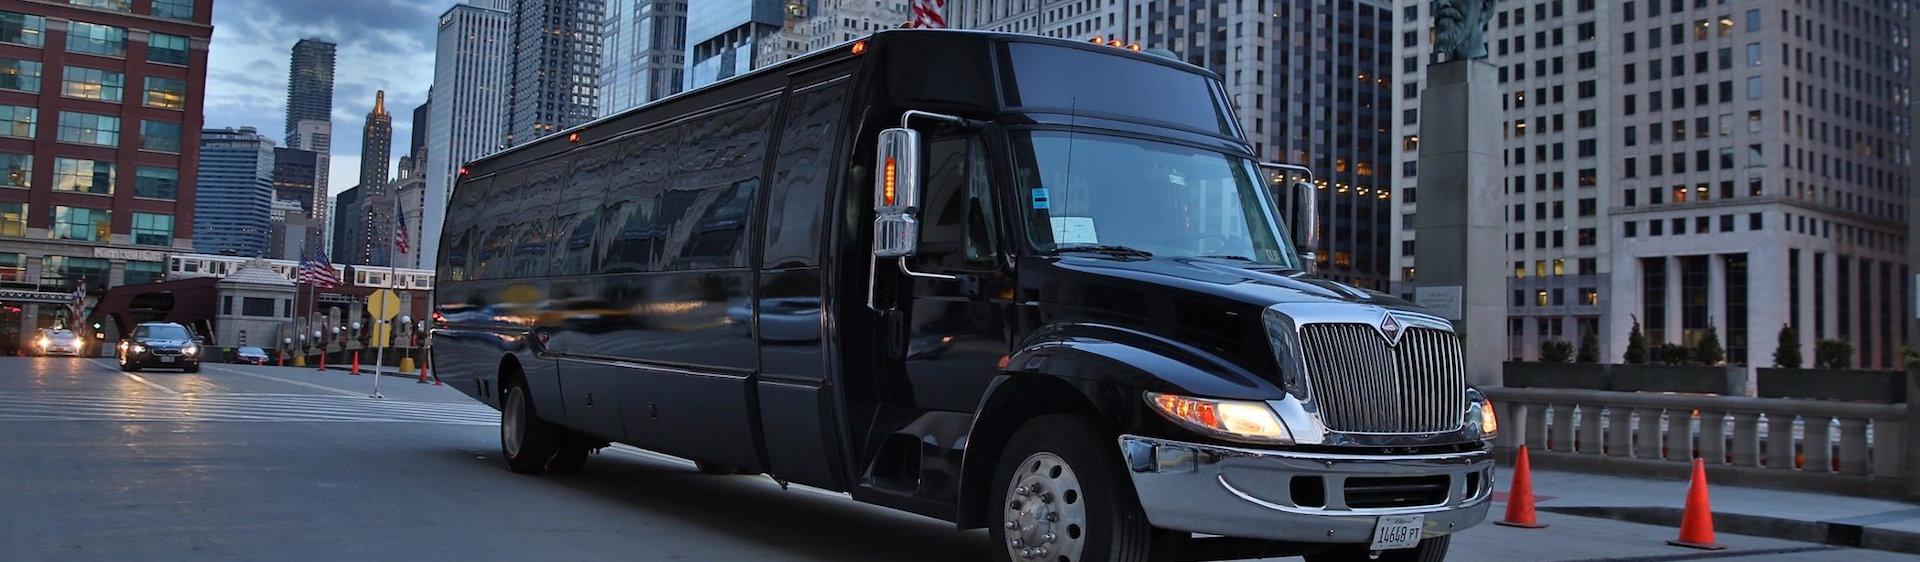 Party Bus Reservations Chicago